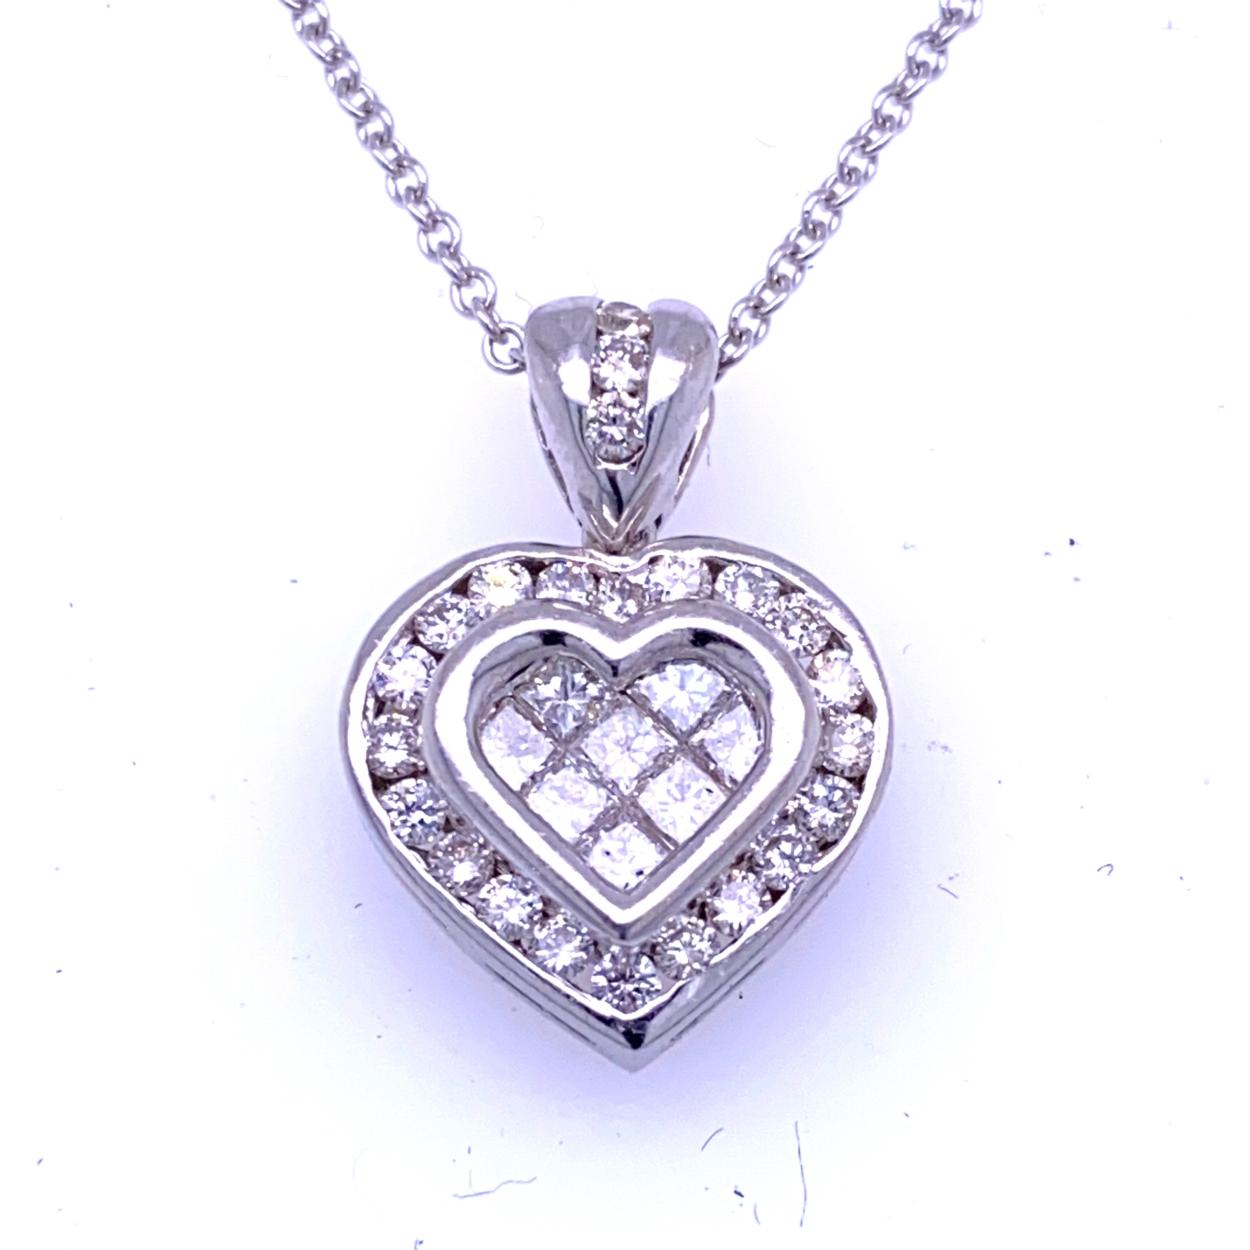 18K Gold Heart shaped Pendant with 8 Invisible Set Princess Cut Diamonds  surrounded by a Channel set Halo of diamonds and Diamond Bale with total weight of 0.81 Ct. 
Total Diamond Weight: 0.81 Ct
Total Necklace Weight: 5 gr
Pendant Size 13x18 mm